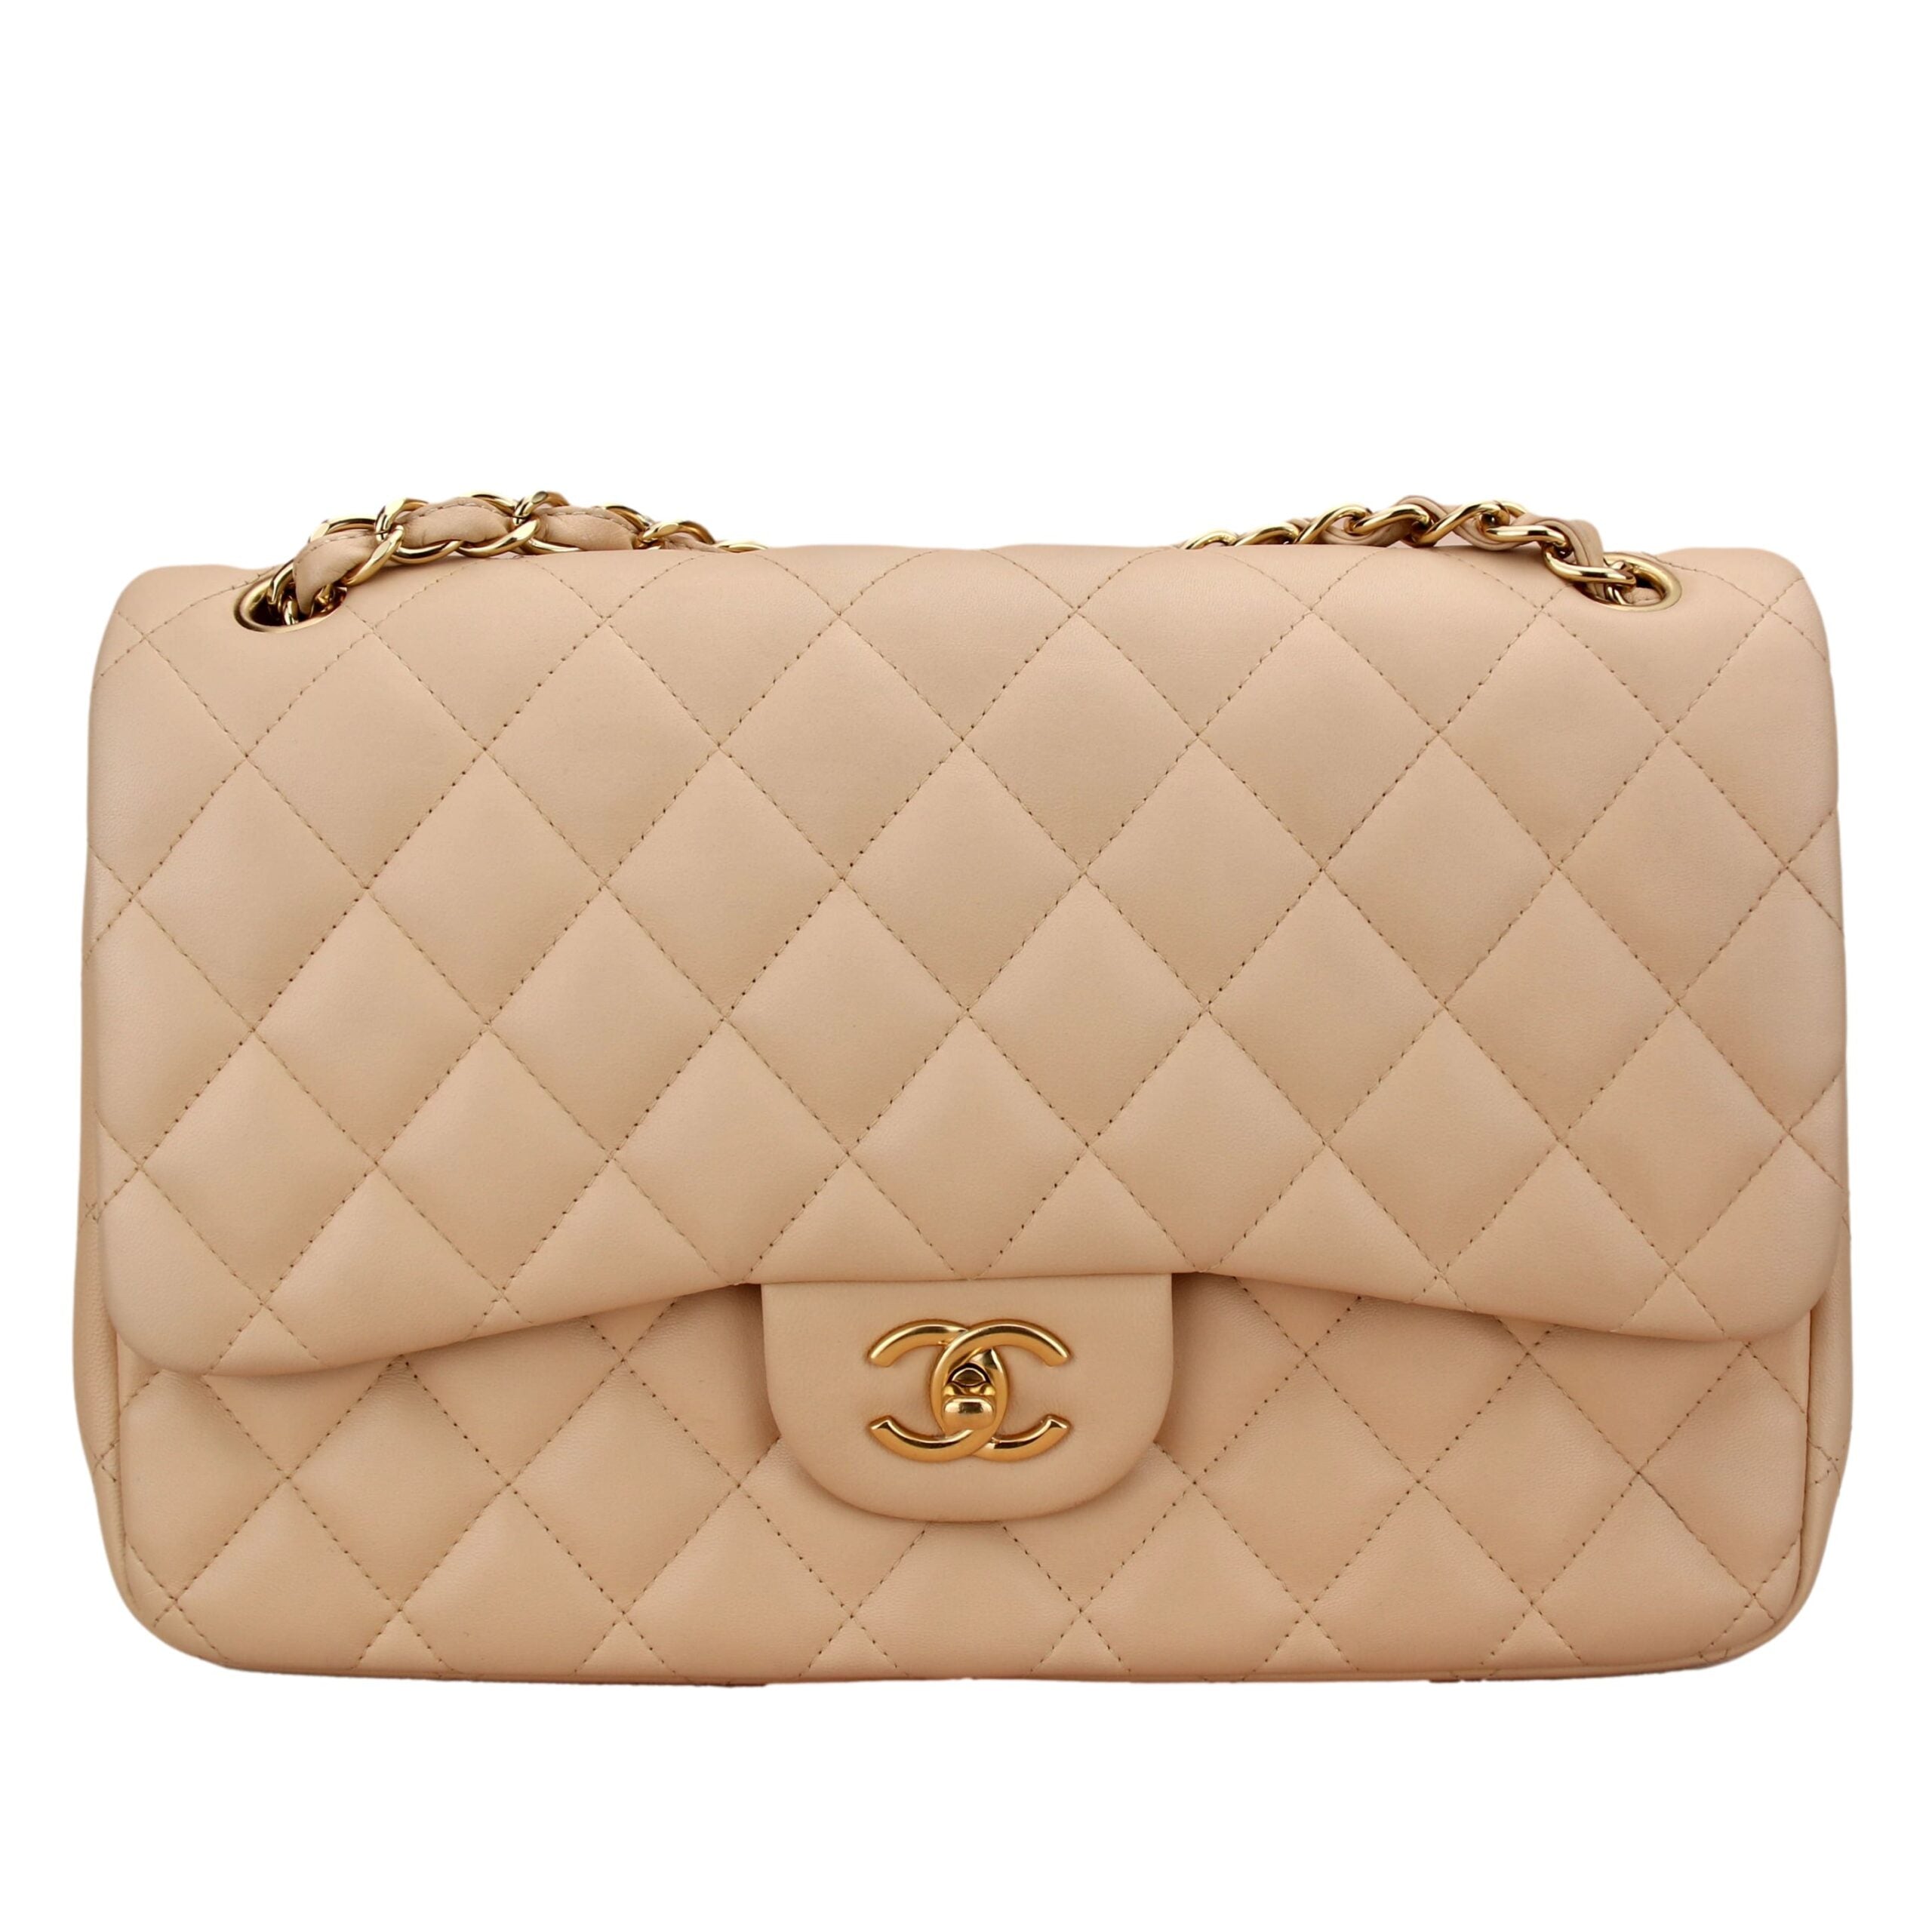 Chanel Beige Clair Caviar Quilted Classic Flap Medium SHW